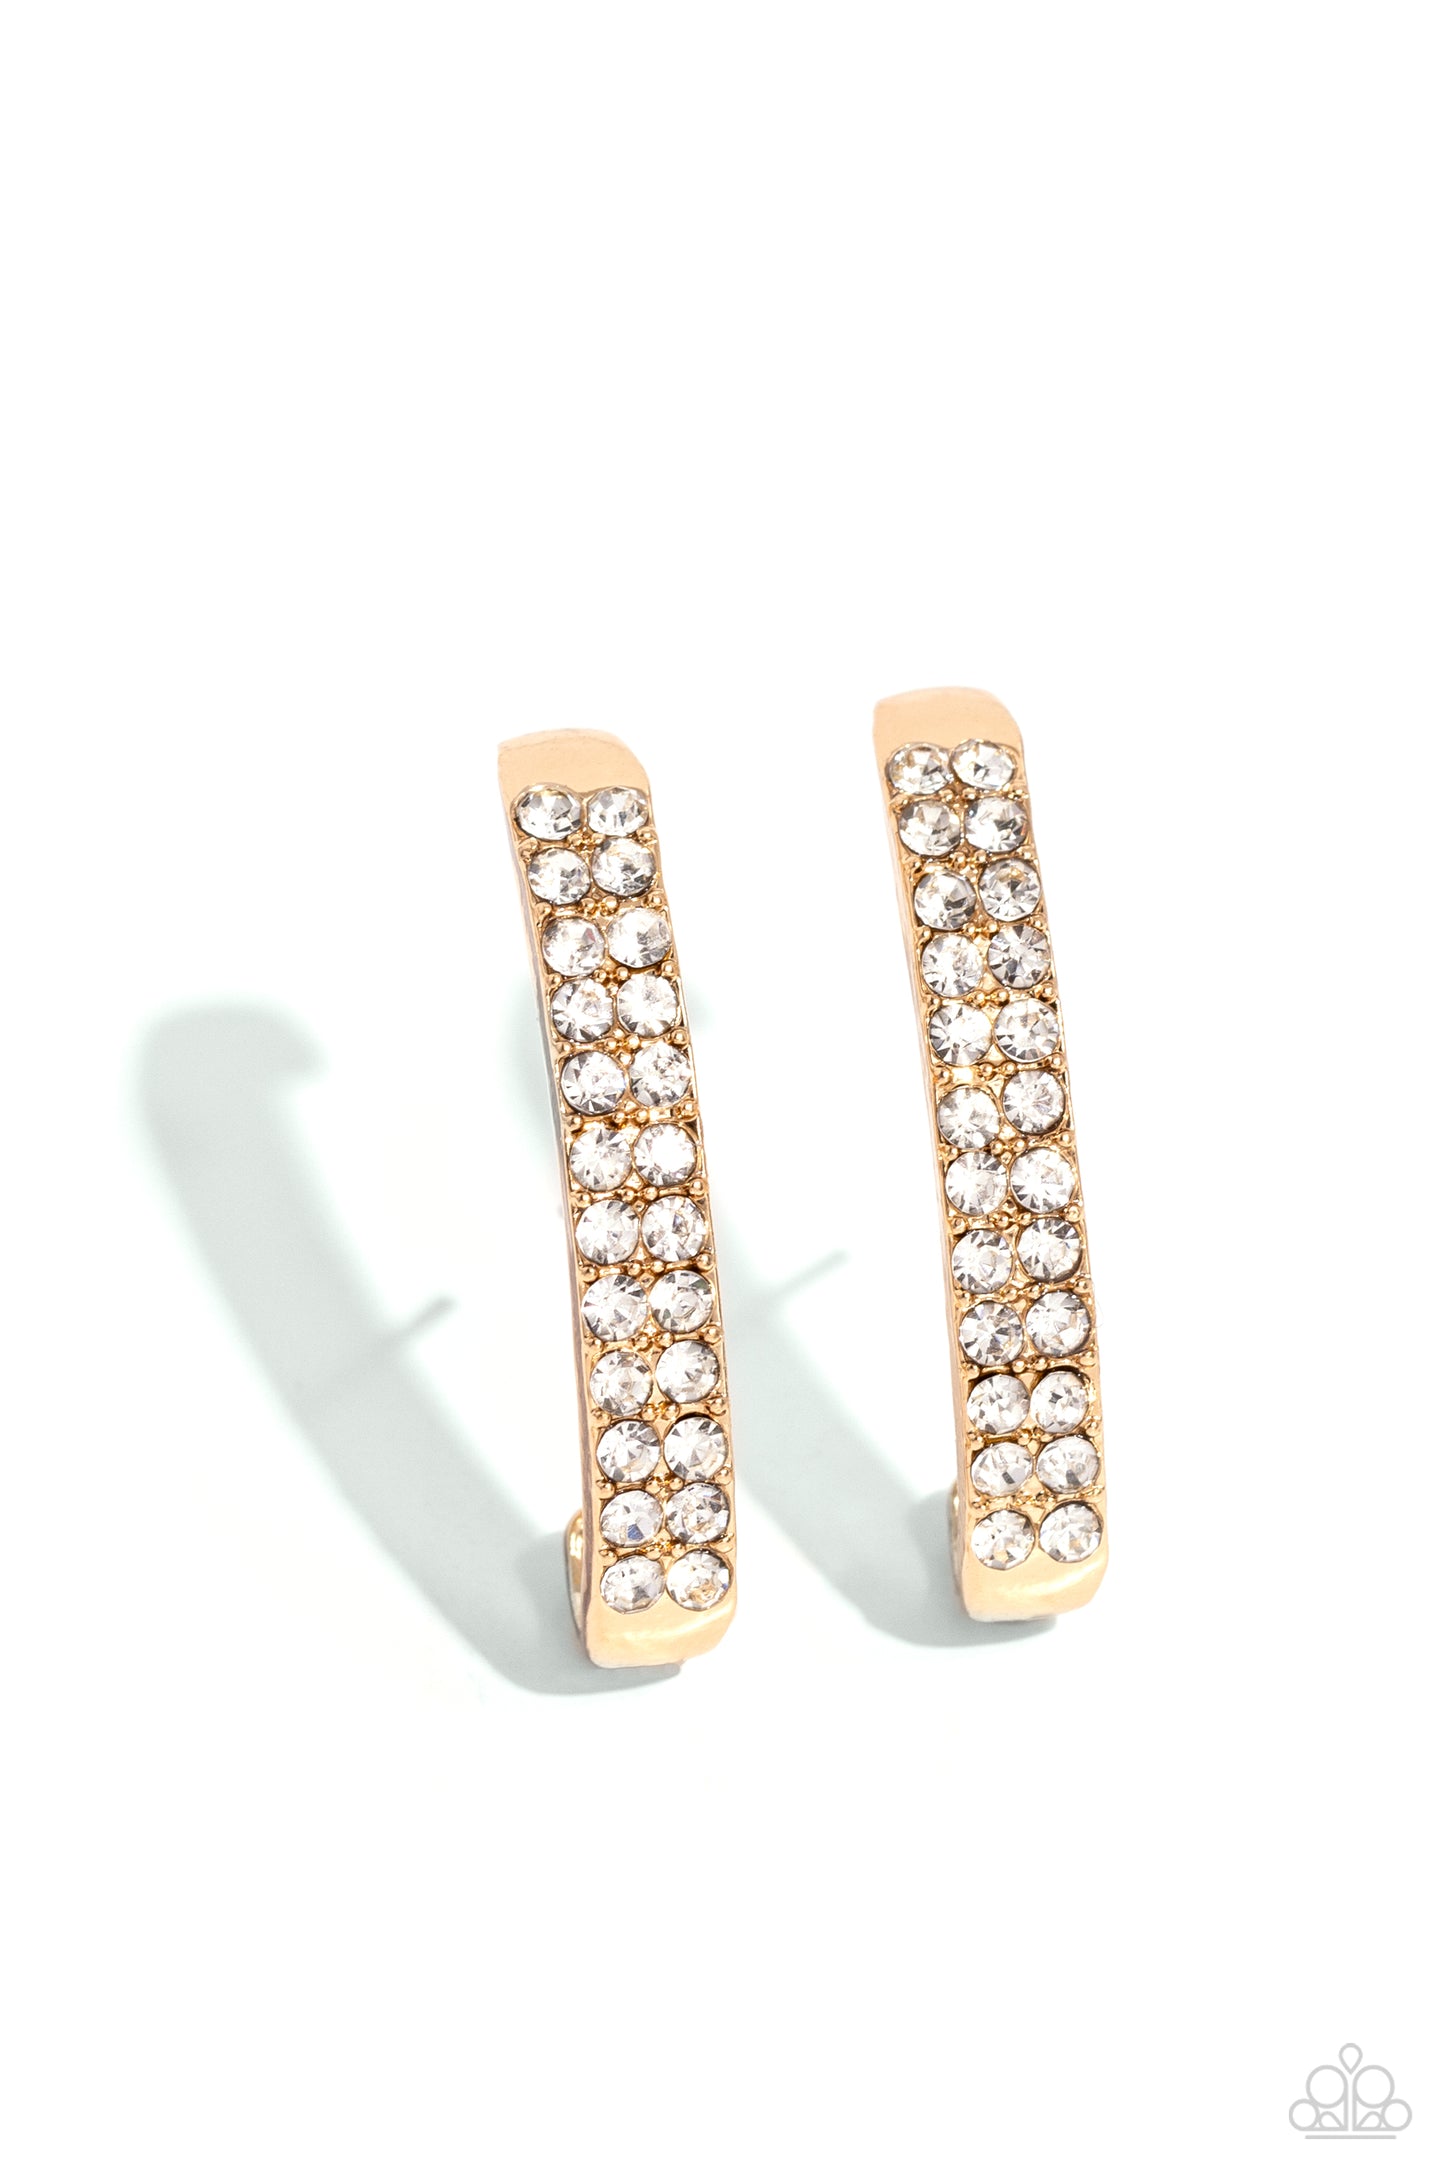 Sliding Series Gold Illusion Post Earring - Paparazzi Accessories  Two rows of glassy white rhinestones are set along the center of a curved gold bar for a refined display of dazzle. Features a sleek surface for sliding ability to desired position on the ear. Due to its structure, adjusting capability is limited.  Sold as one pair of illusion post earrings.  P5PO-IPGD-267XX